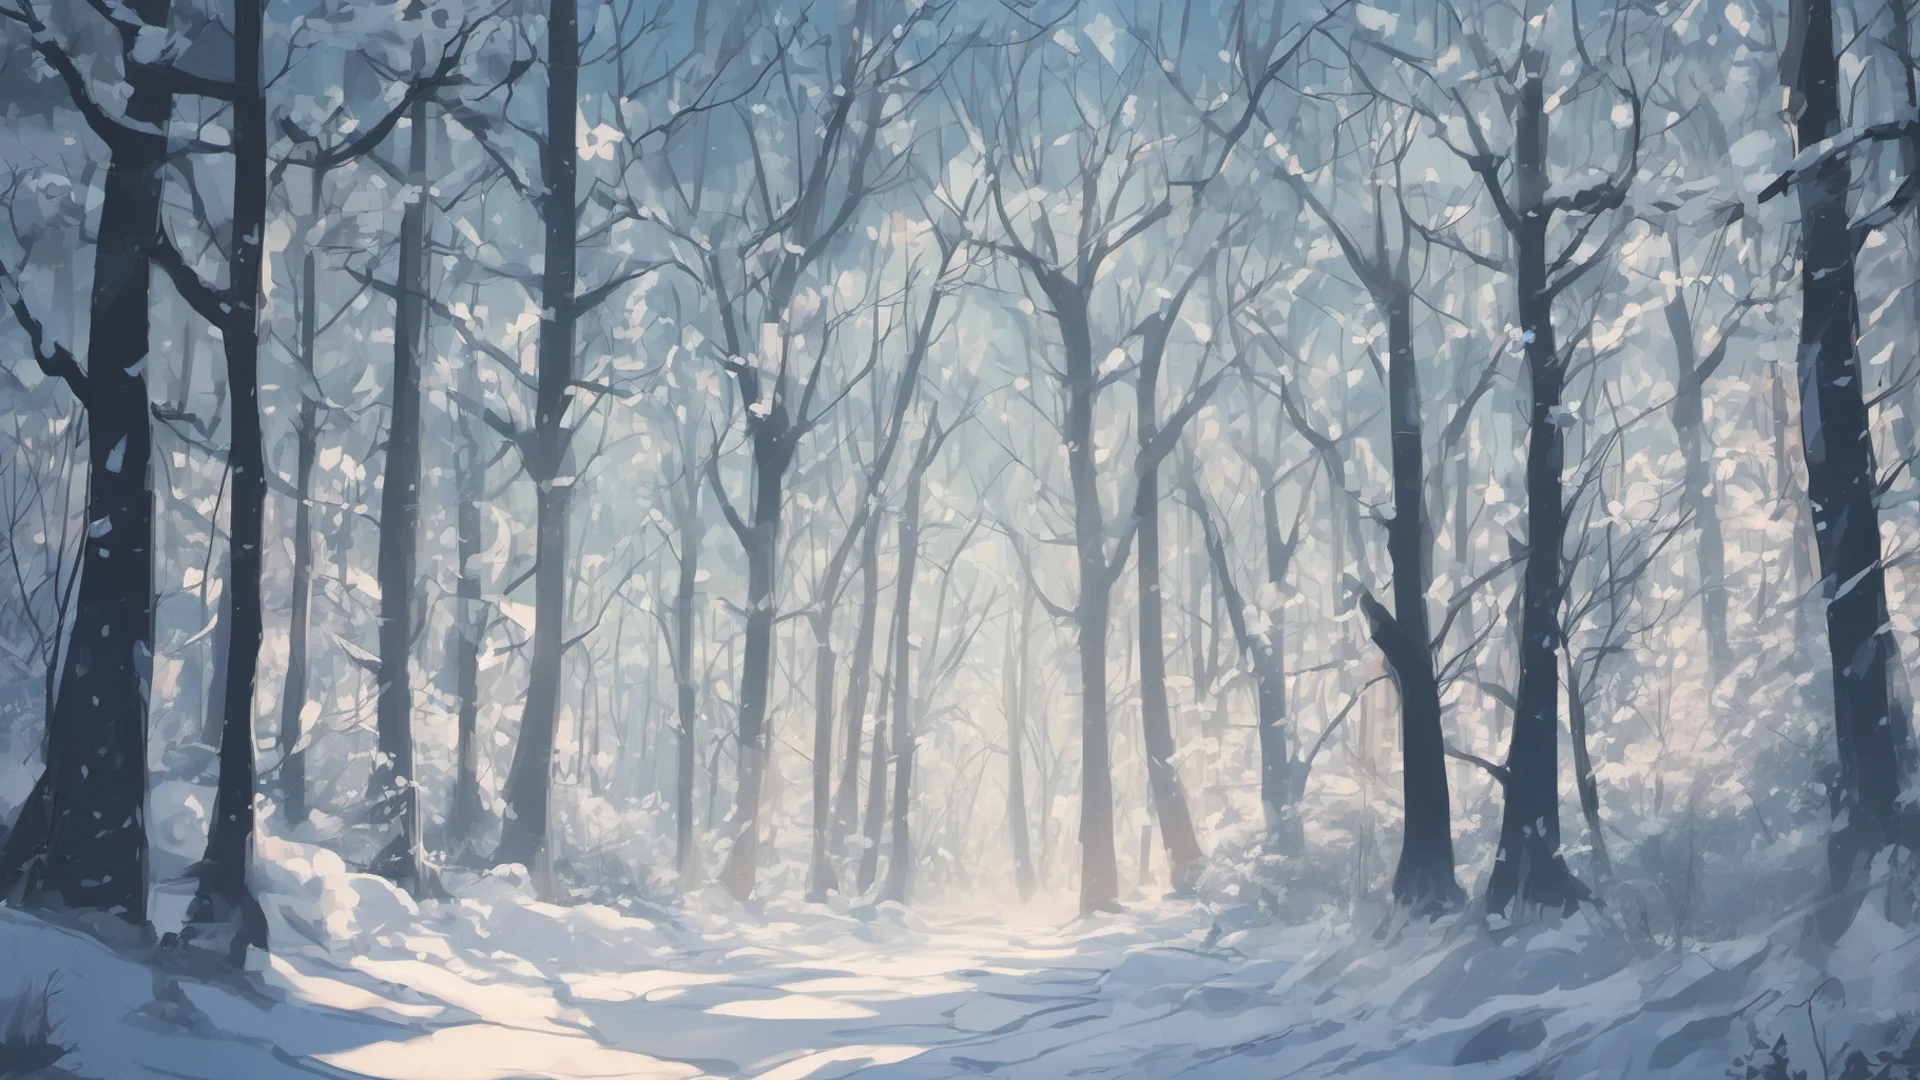 aianime style winter forest amazing awesome portrait 2 wide